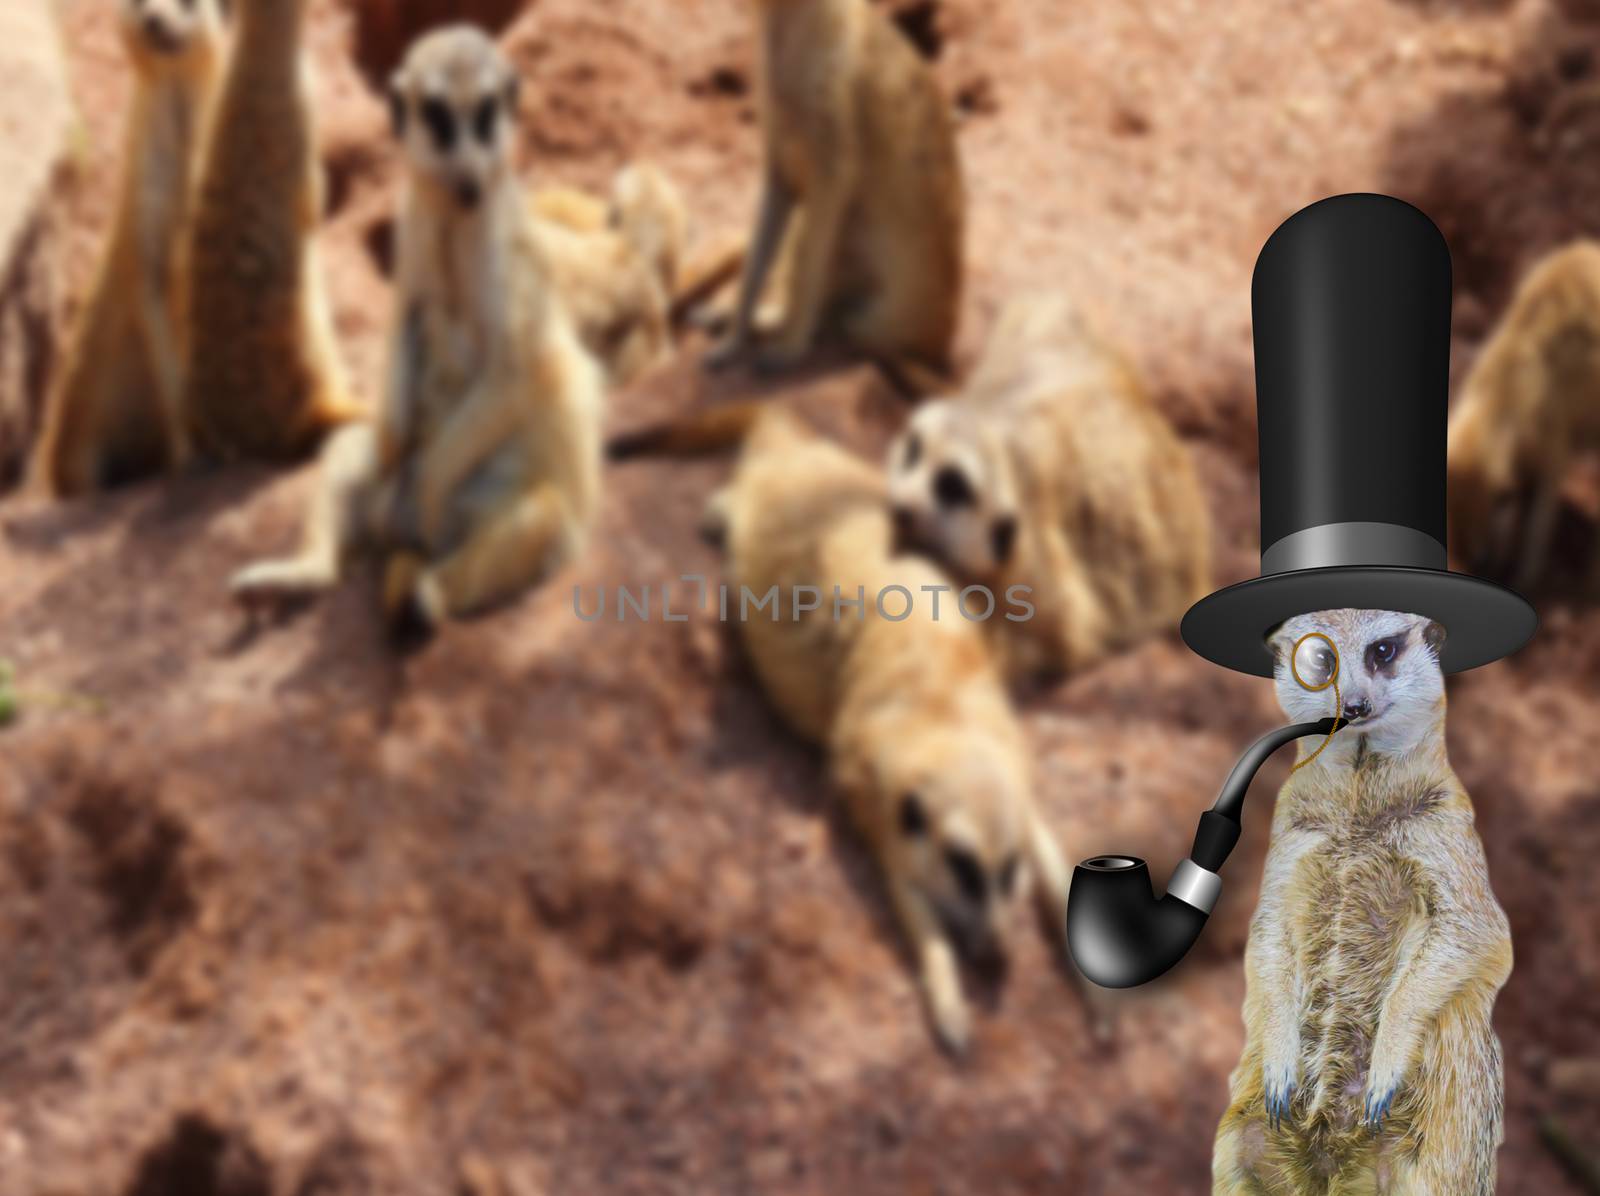 the odd one out a old english posh gentlemen meerkat wearing a top hat standing infront of his normal family by charlottebleijenberg